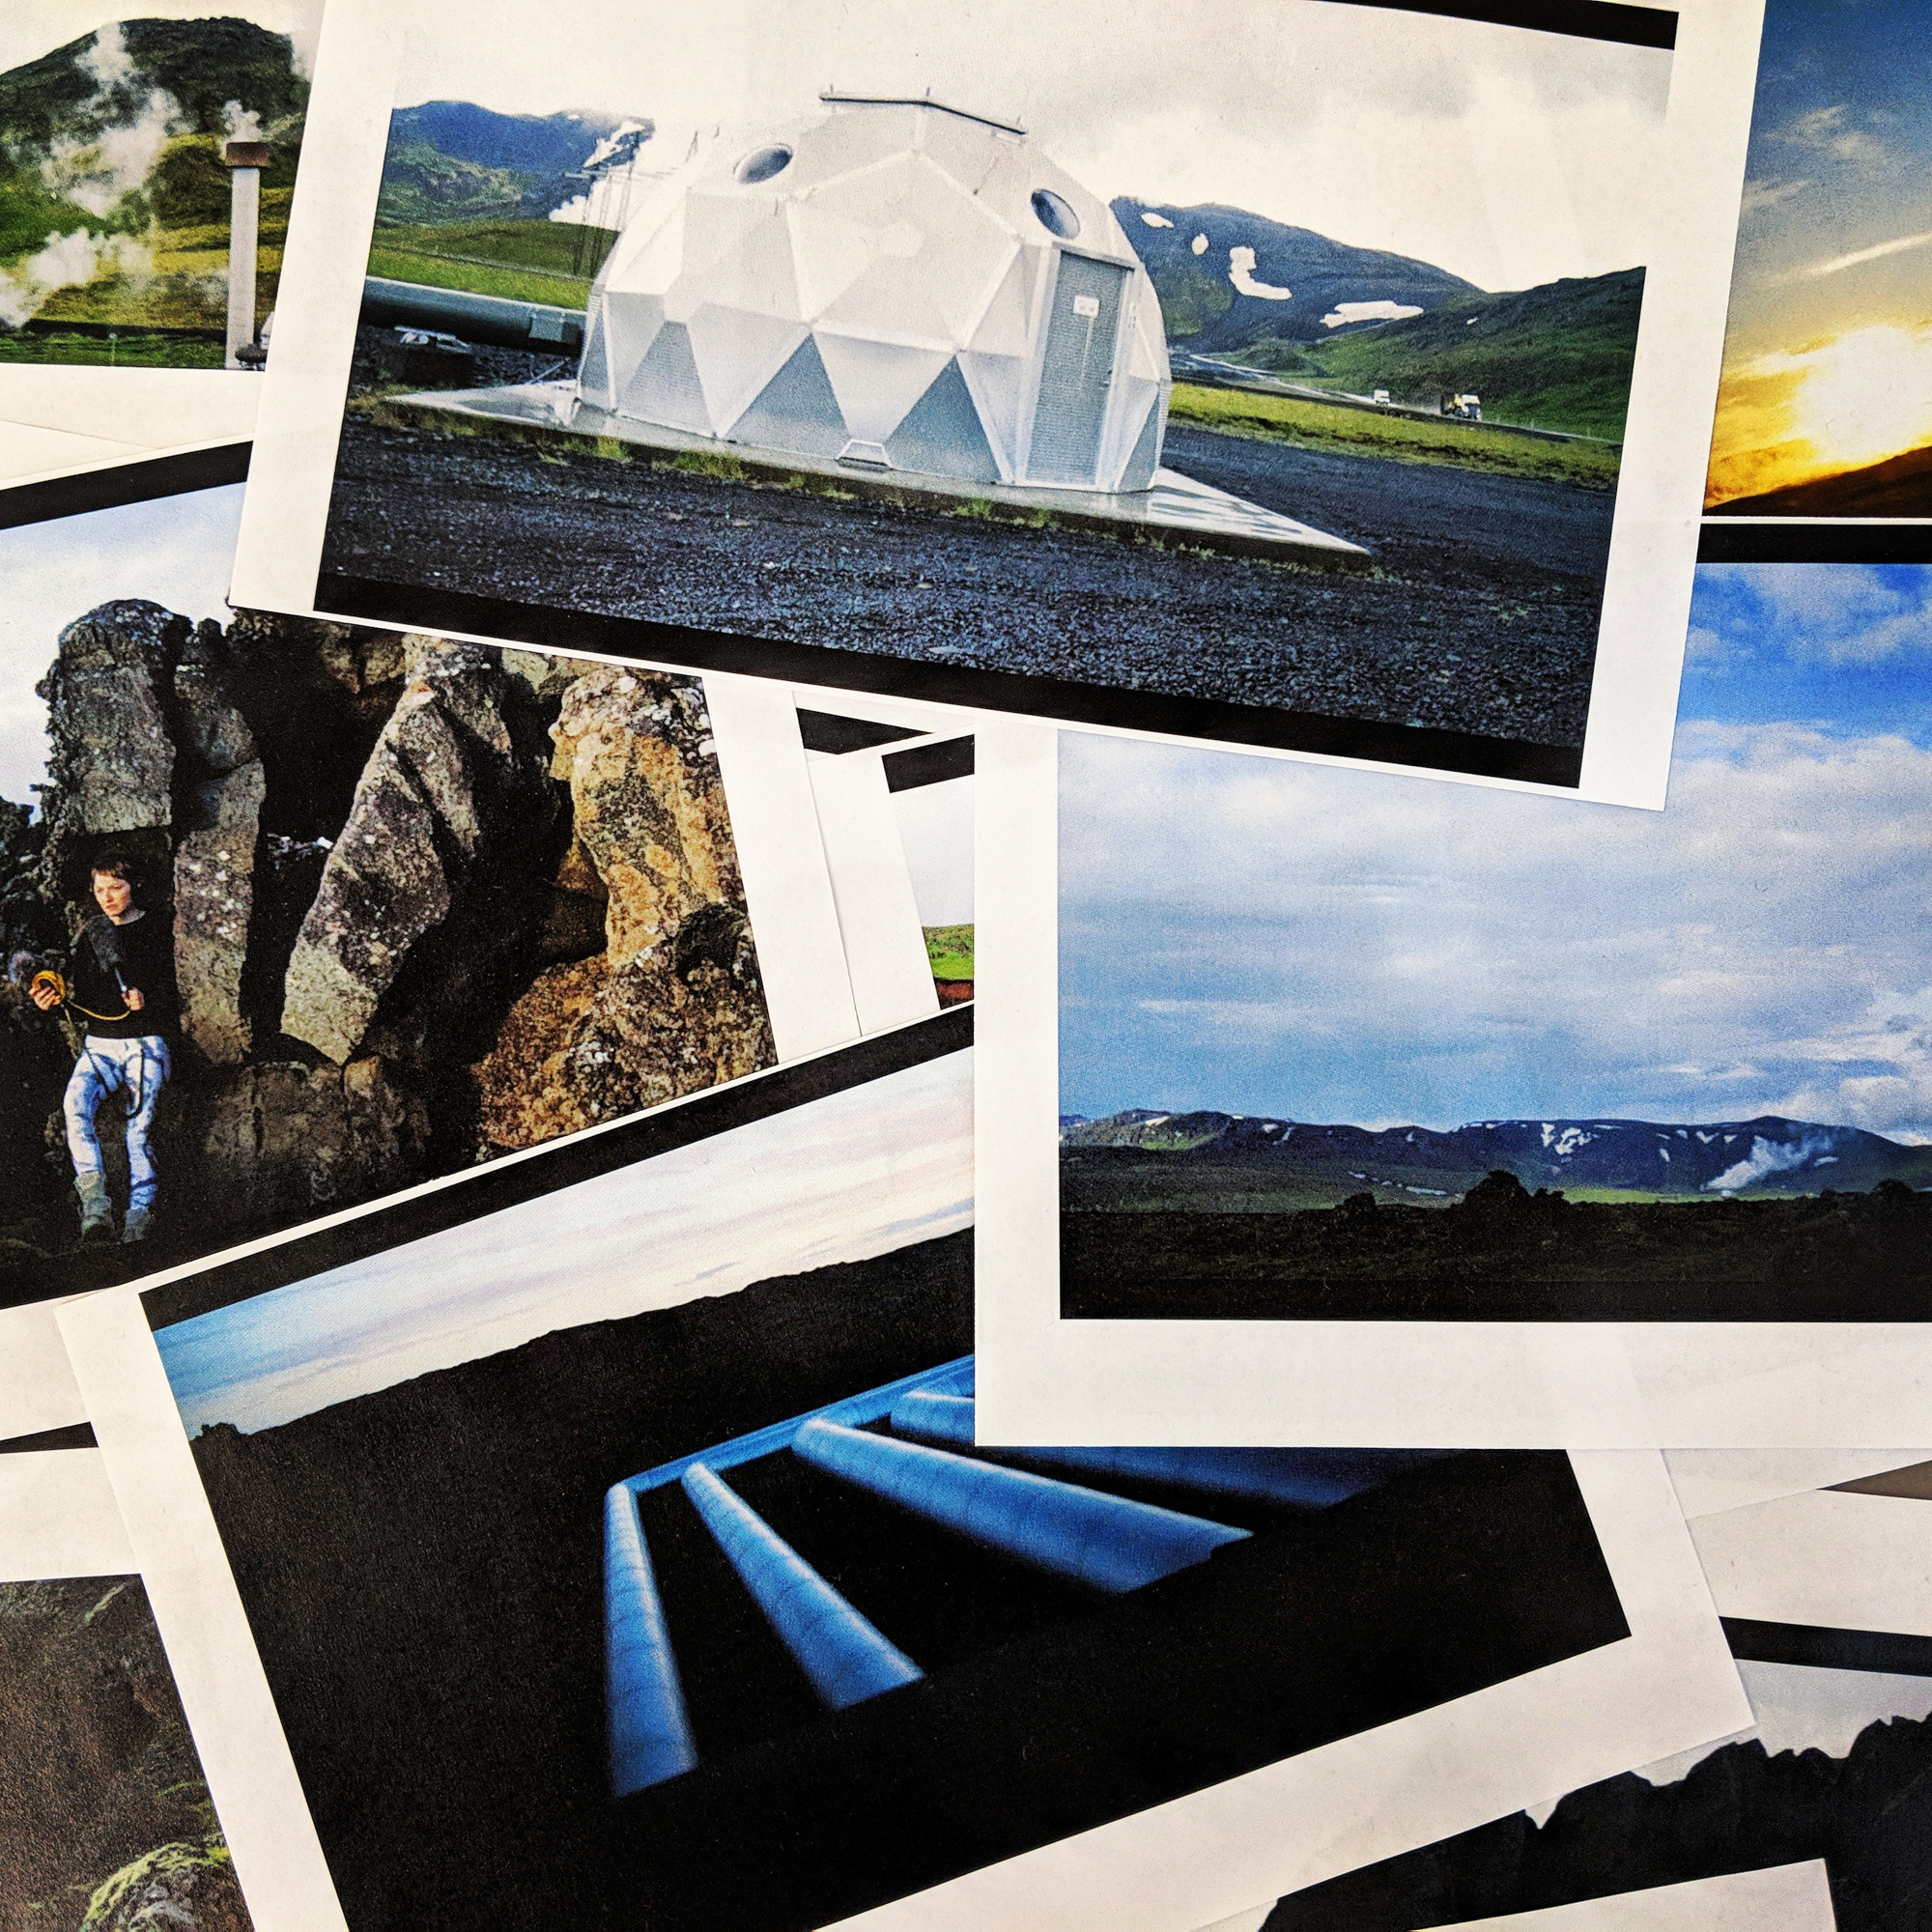 Several video stills printed on paper are scattered haphazardly in a pile. Among them: a silver geodesic dome, a person nestled into a rock speaking into a microphone, large pipes and steaming geysers.